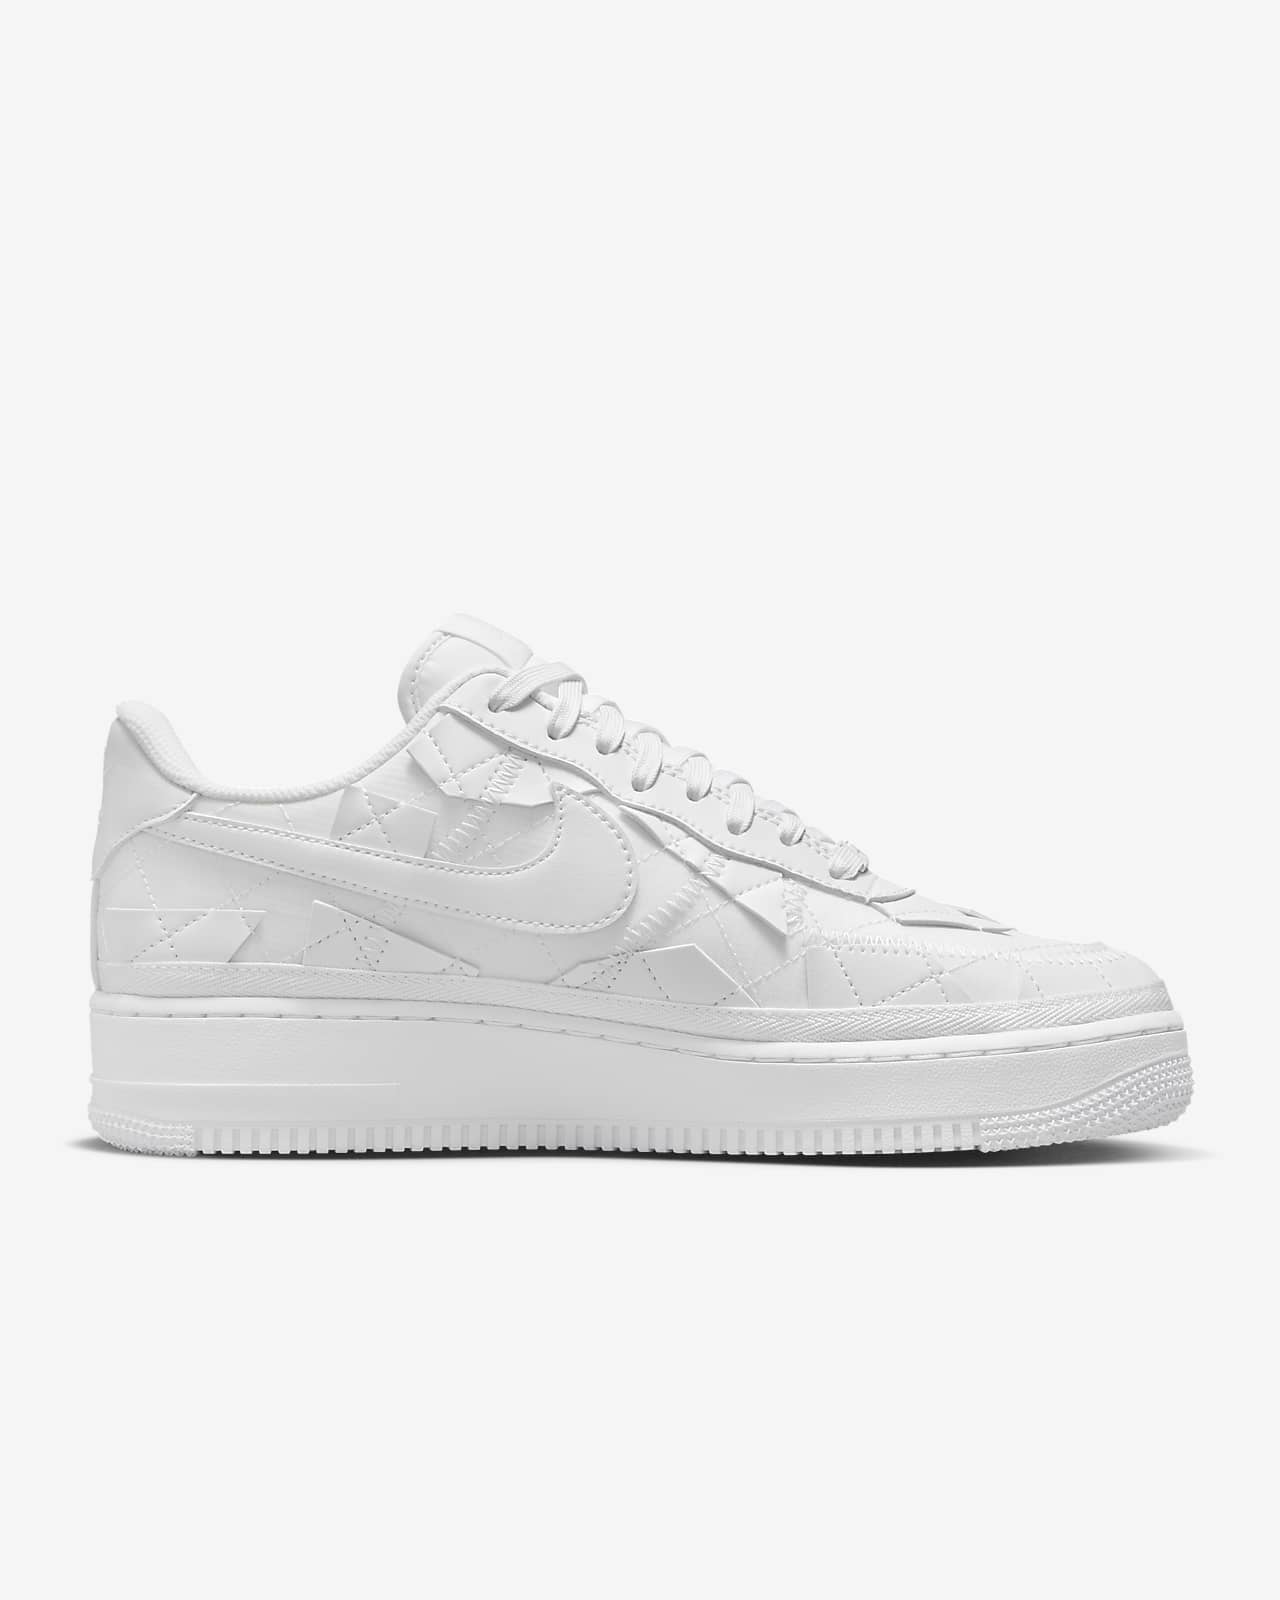 Nike Force 1 Low Men's Shoes.